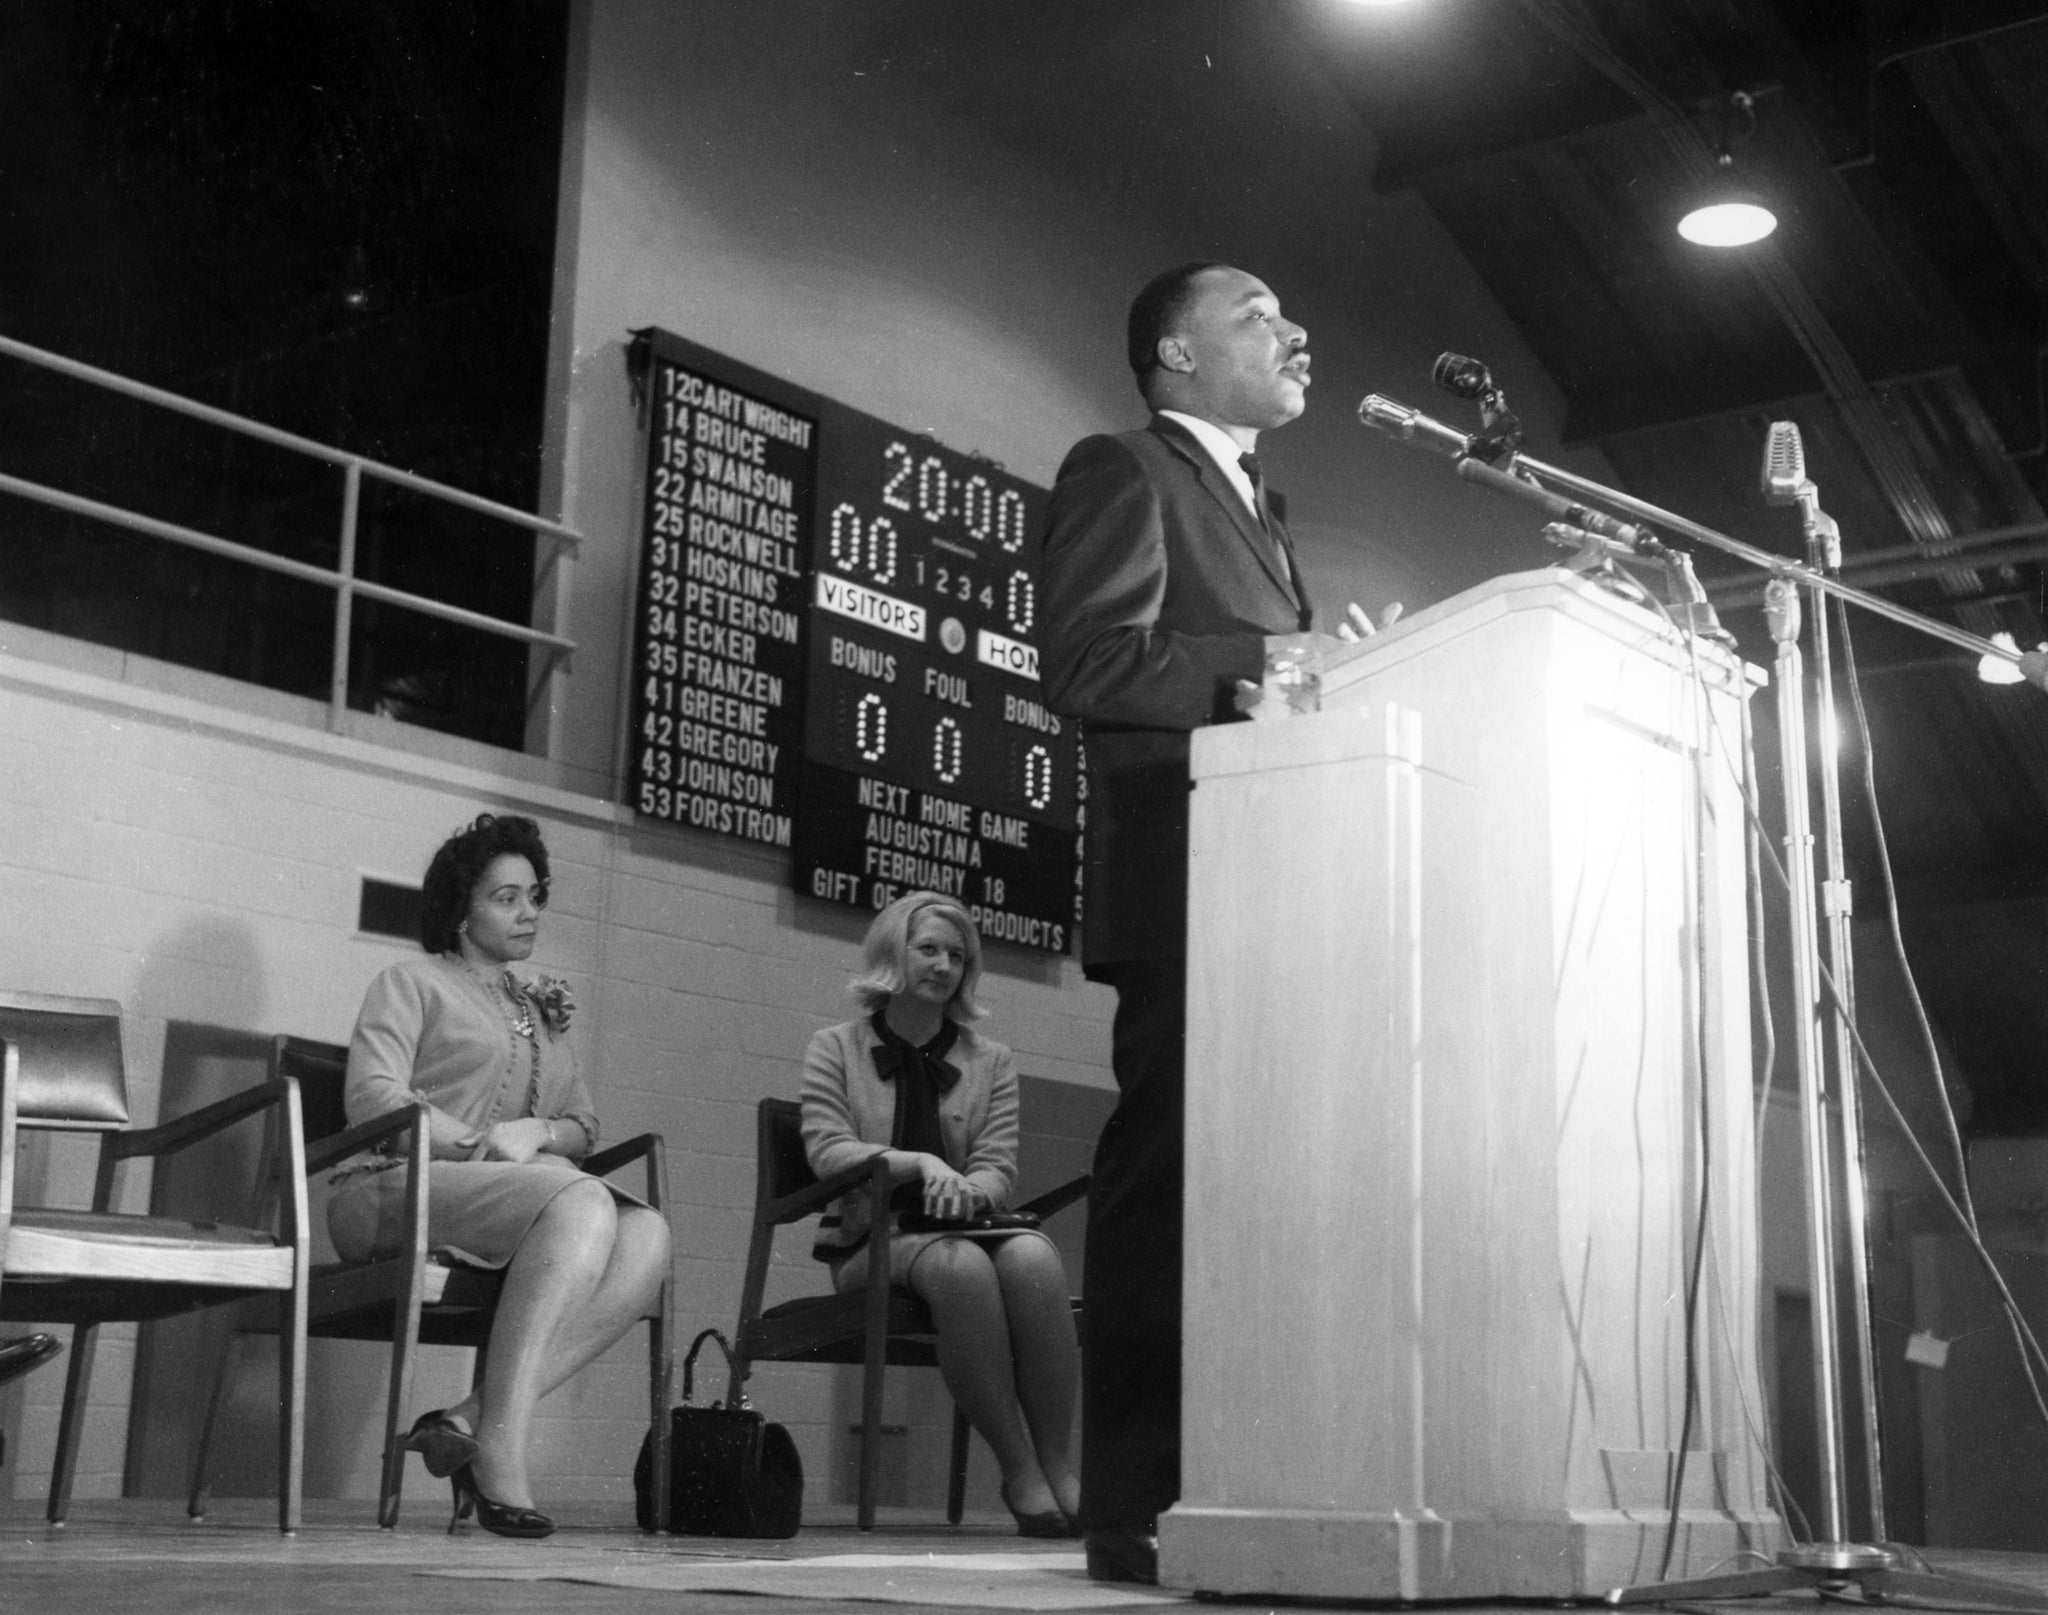 Reverend Doctor Martin Luther King Jr. speaking on the Illinois Wesleyan University campus on February 2, 1966. Behind him are Coretta Scott King and Elizabeth Lindblom. -- Courtesy Tate Archives & Special Collections, The Ames Library, Illinois Wesleyan University, Bloomington, Illinois